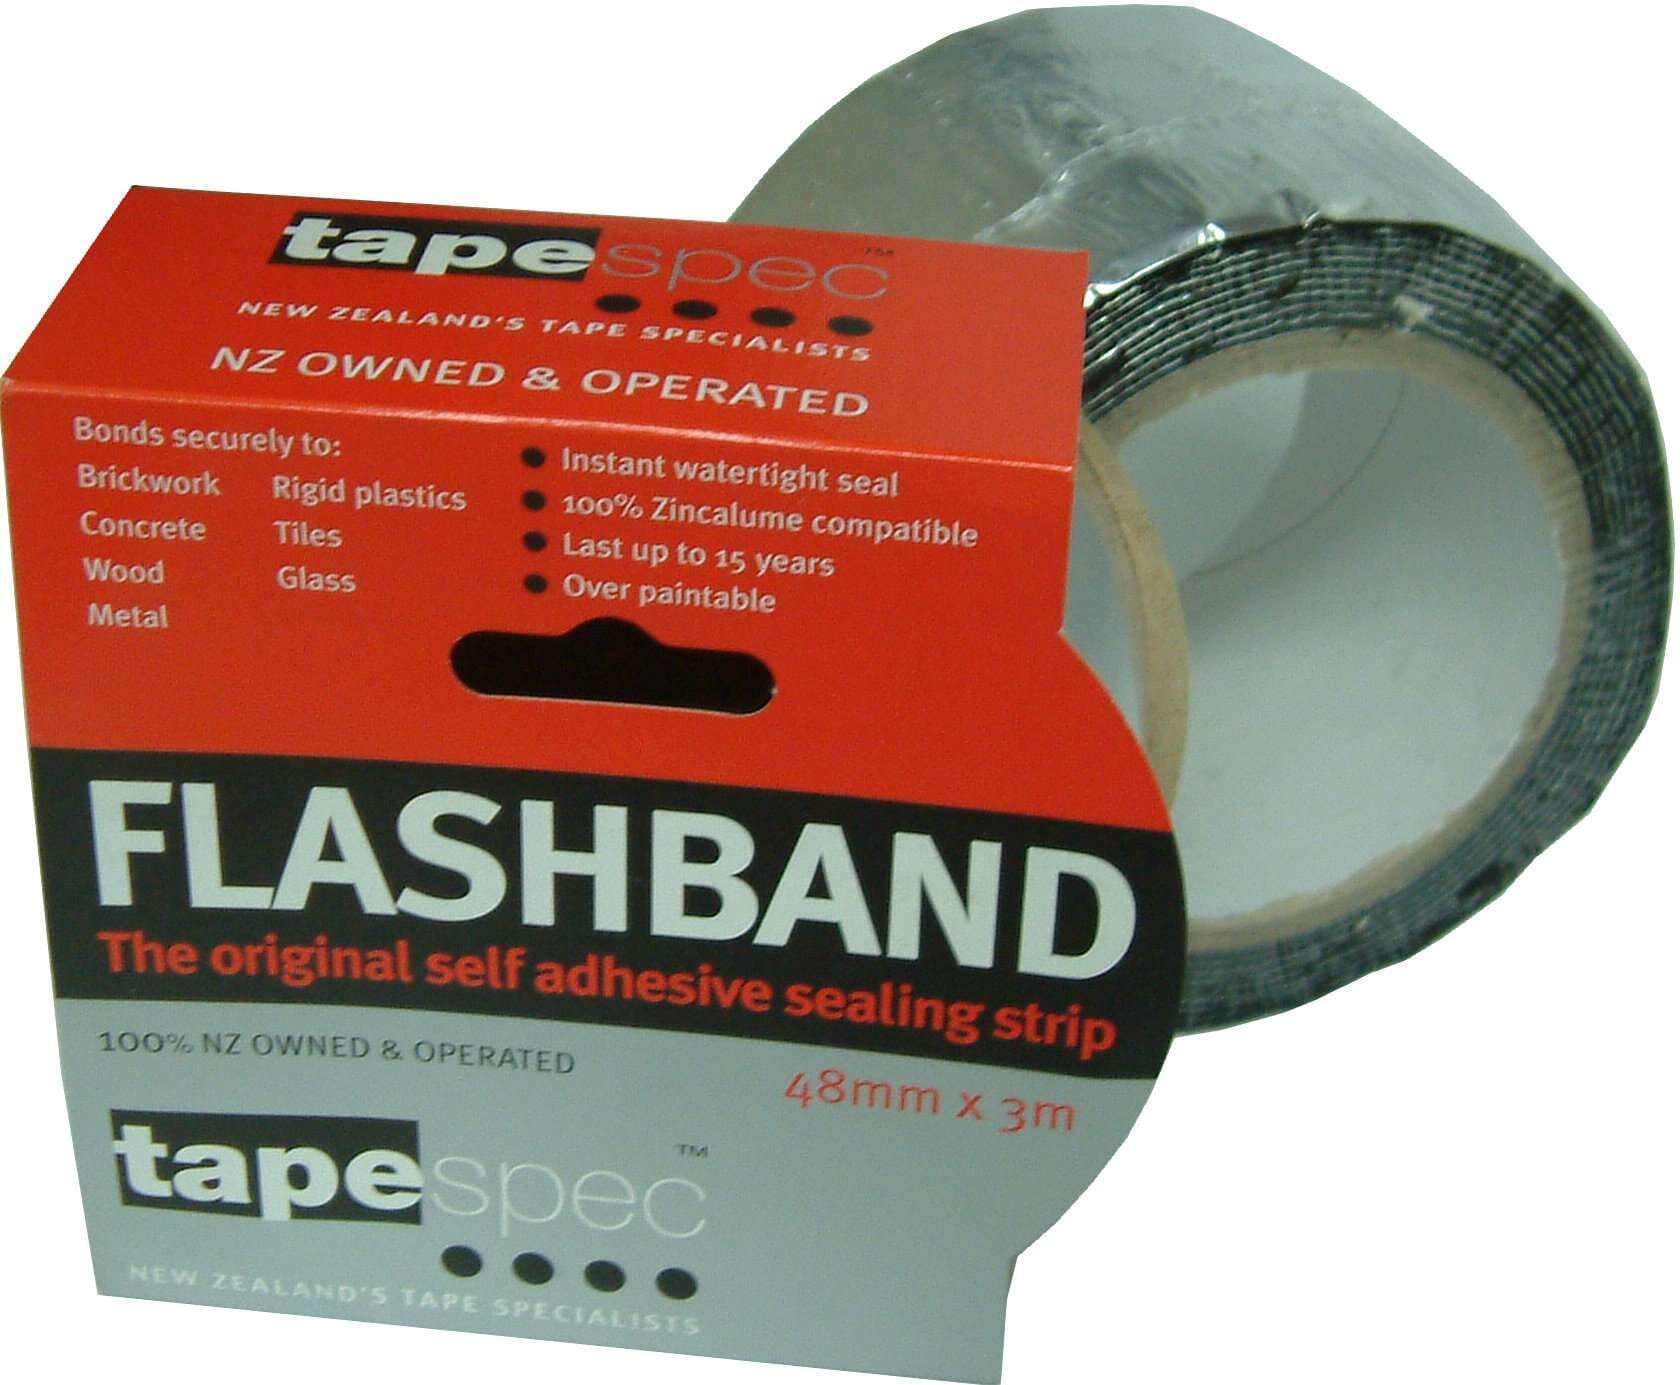 Tapespec Flashband Roofing Sealing Strip - Silver 75mm x 3m